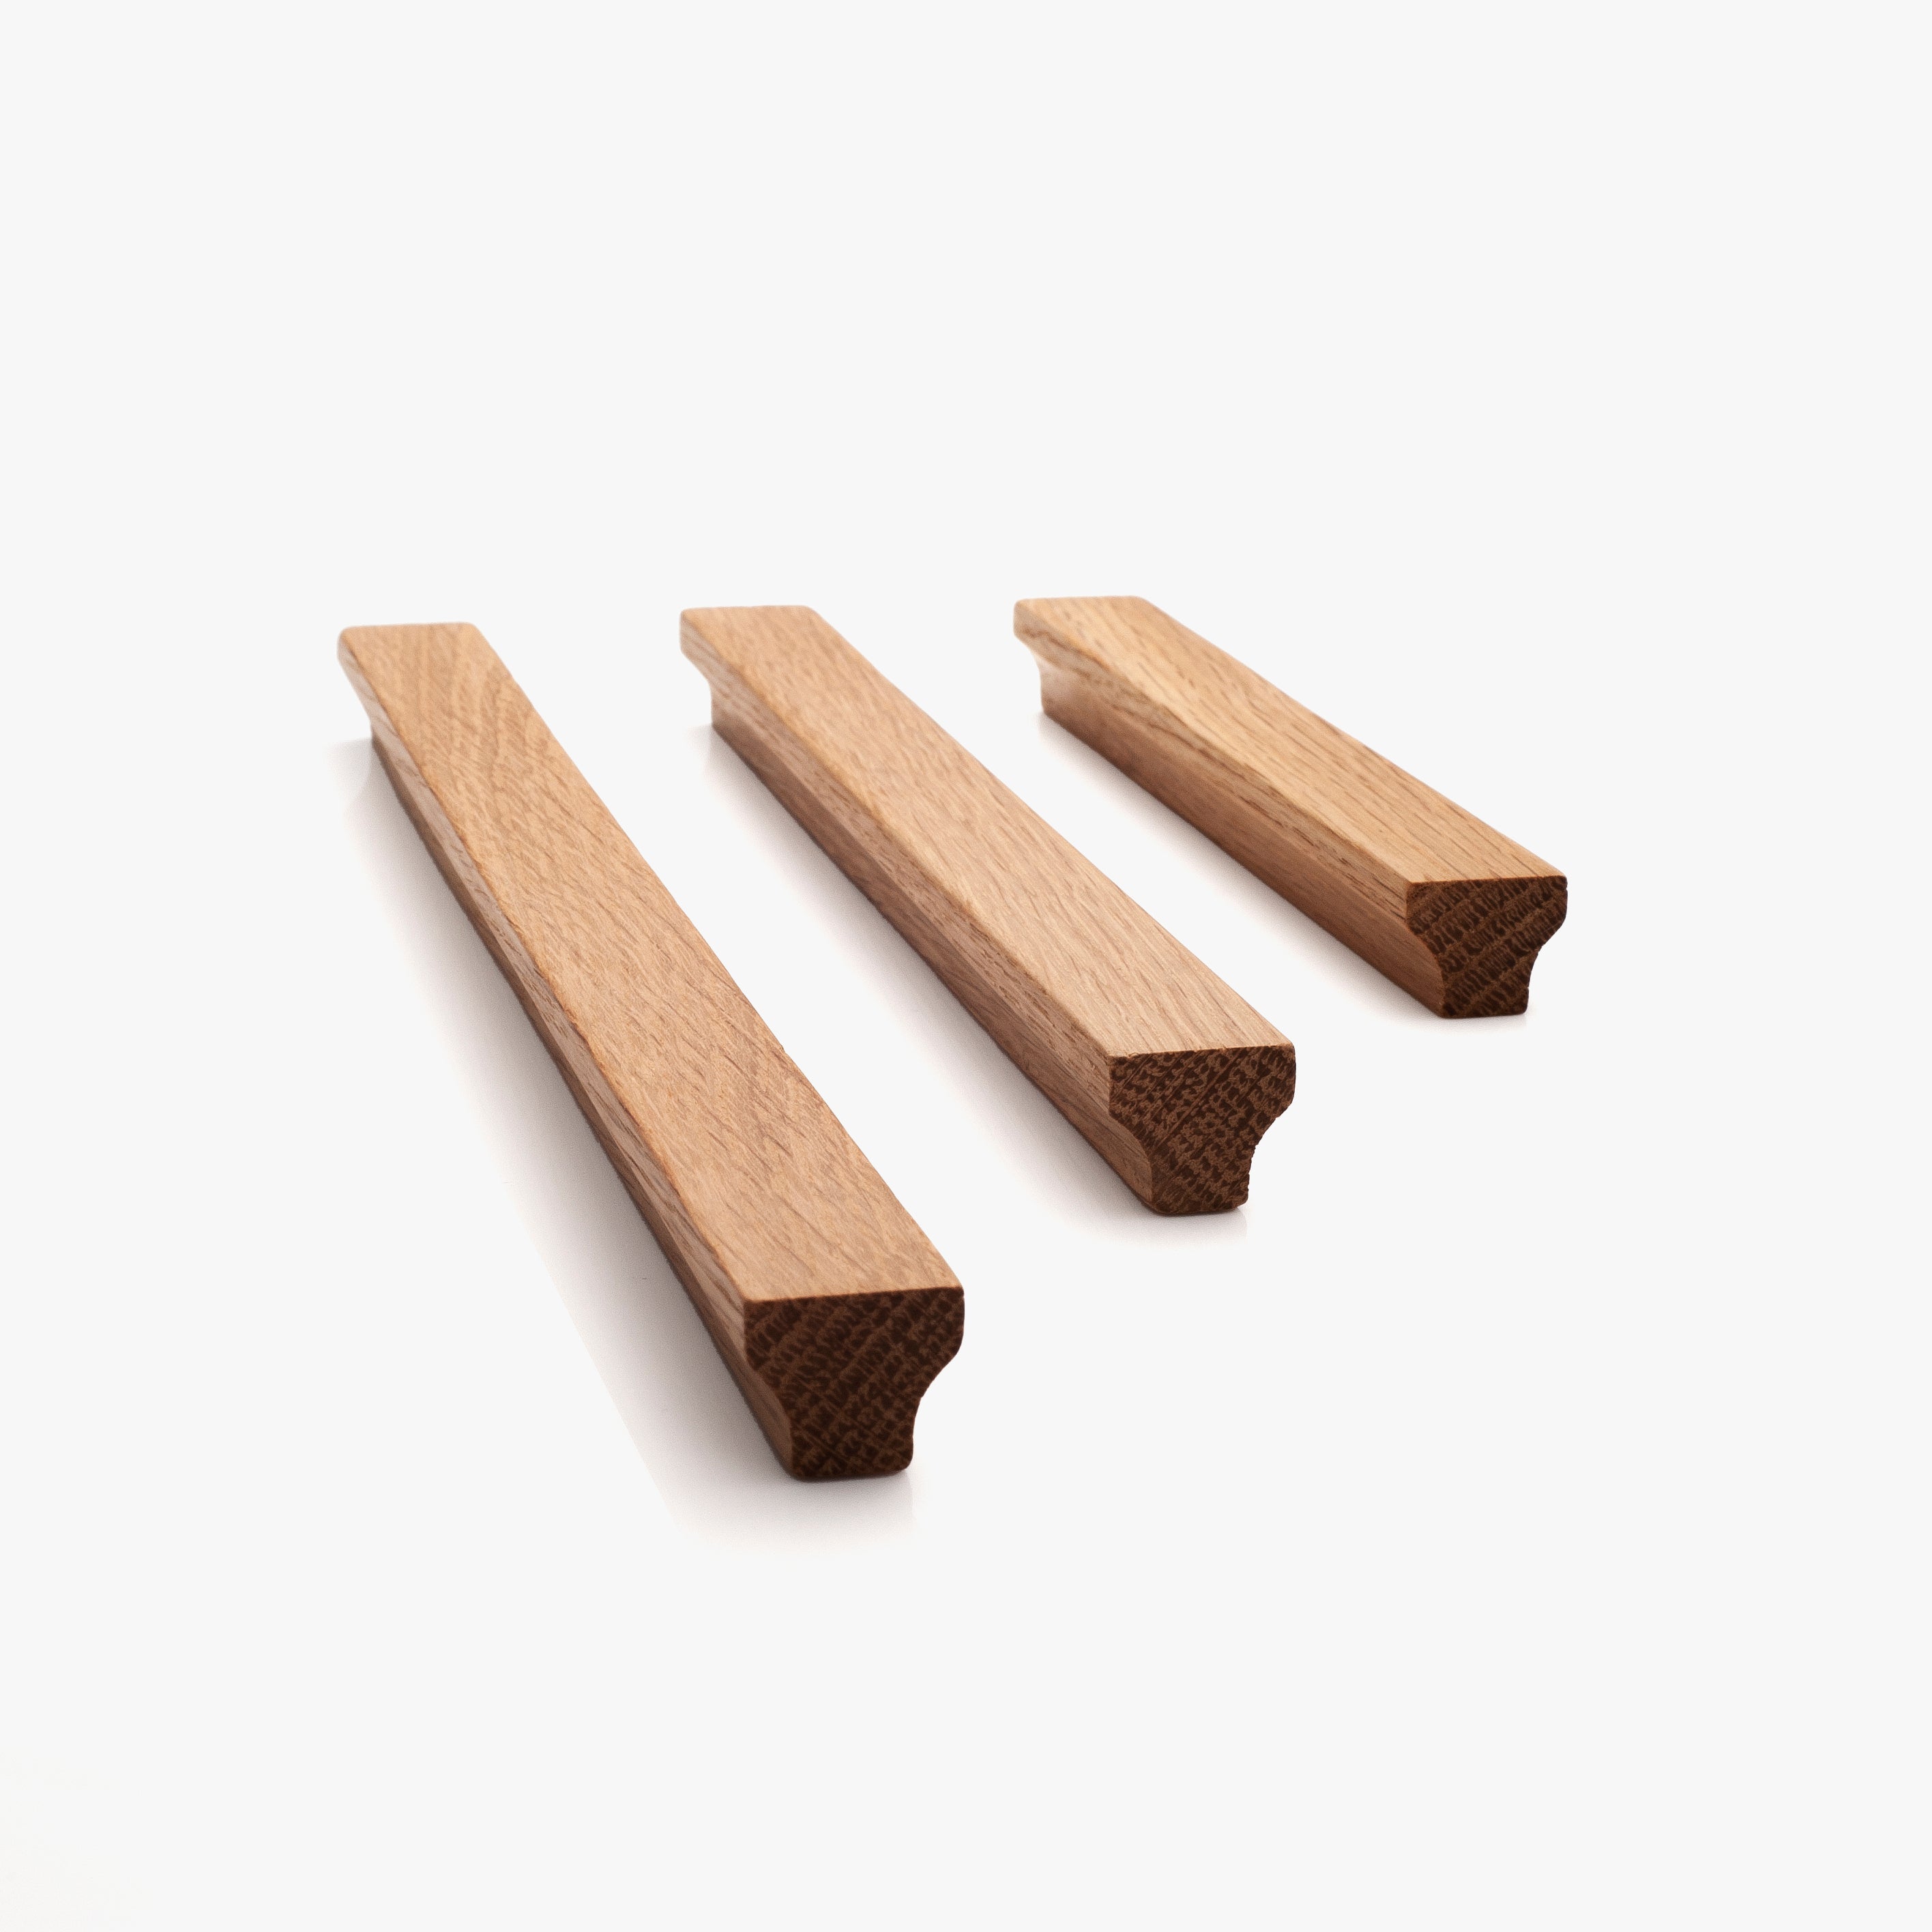 Luxury Oak & Wooden Handles - Designed and made in NZ by C S Studios